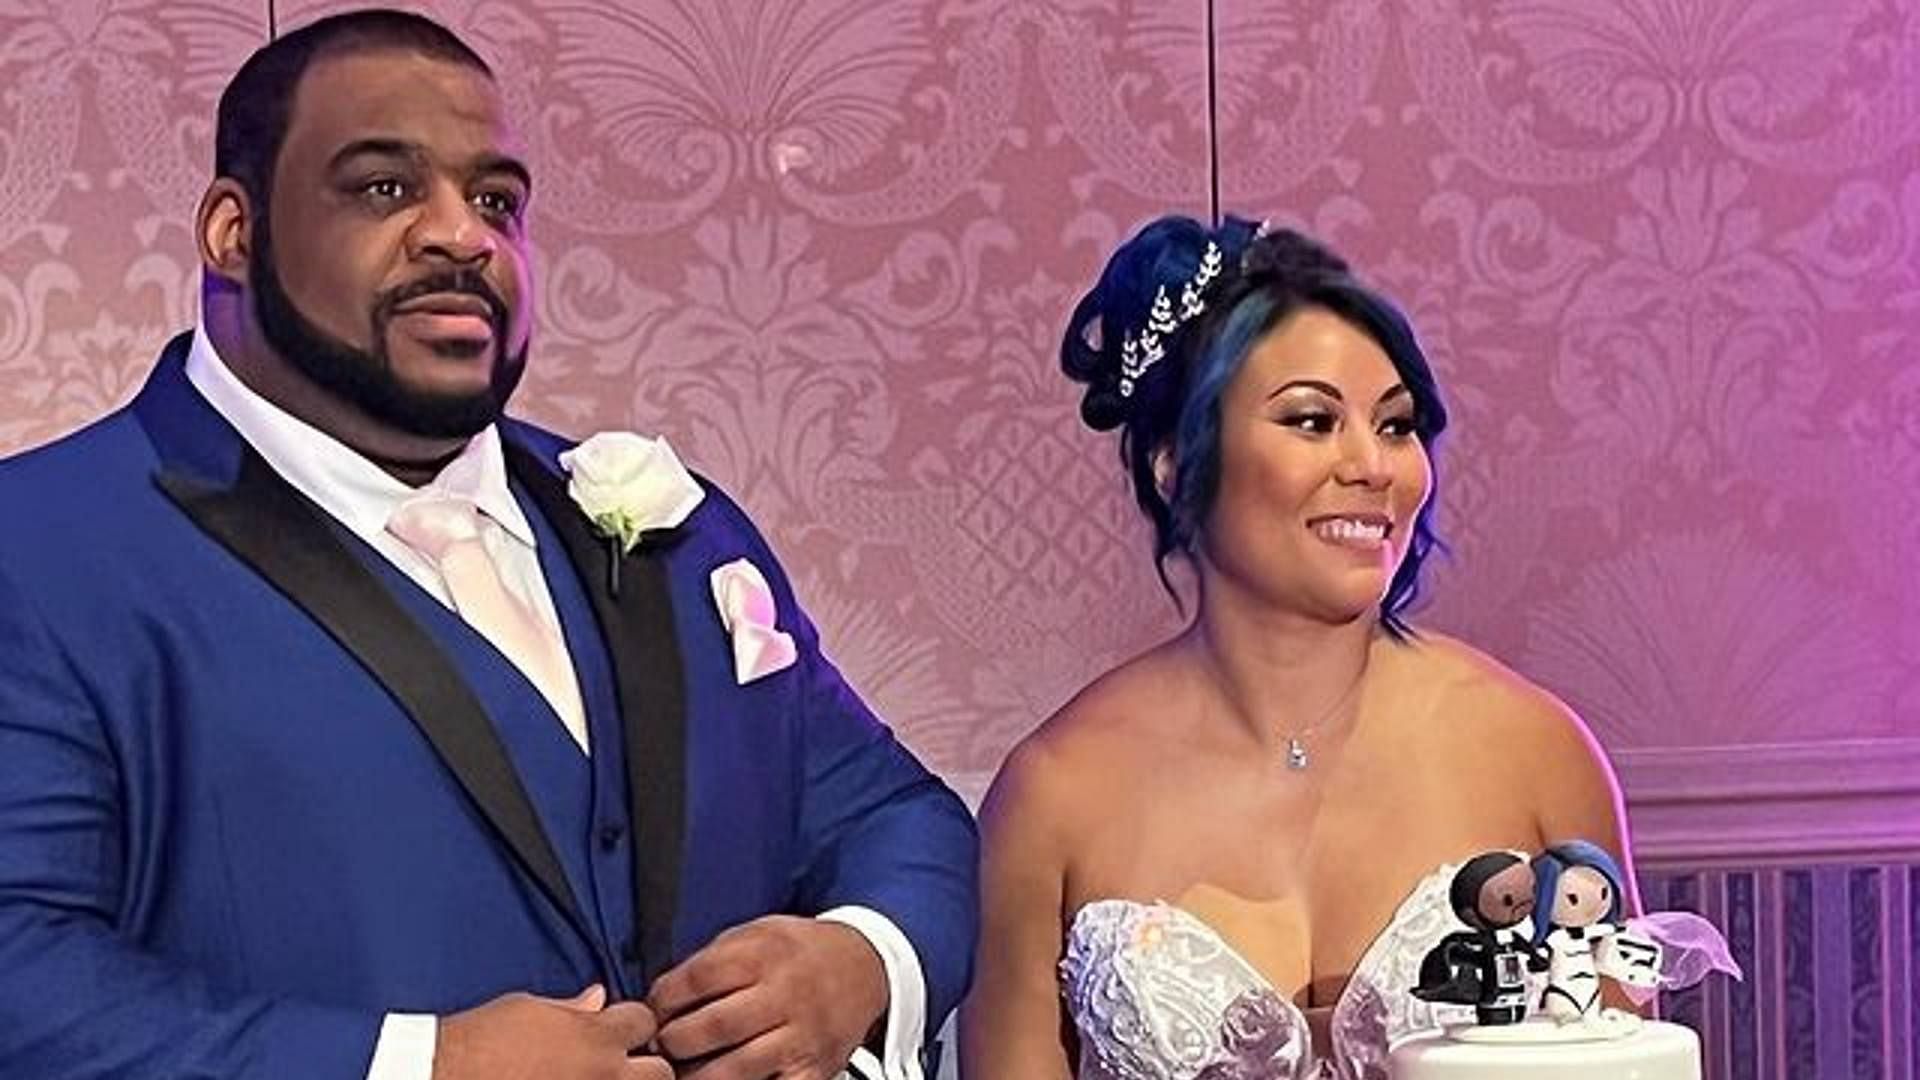 Keith Lee and Mia Yim got married recently.